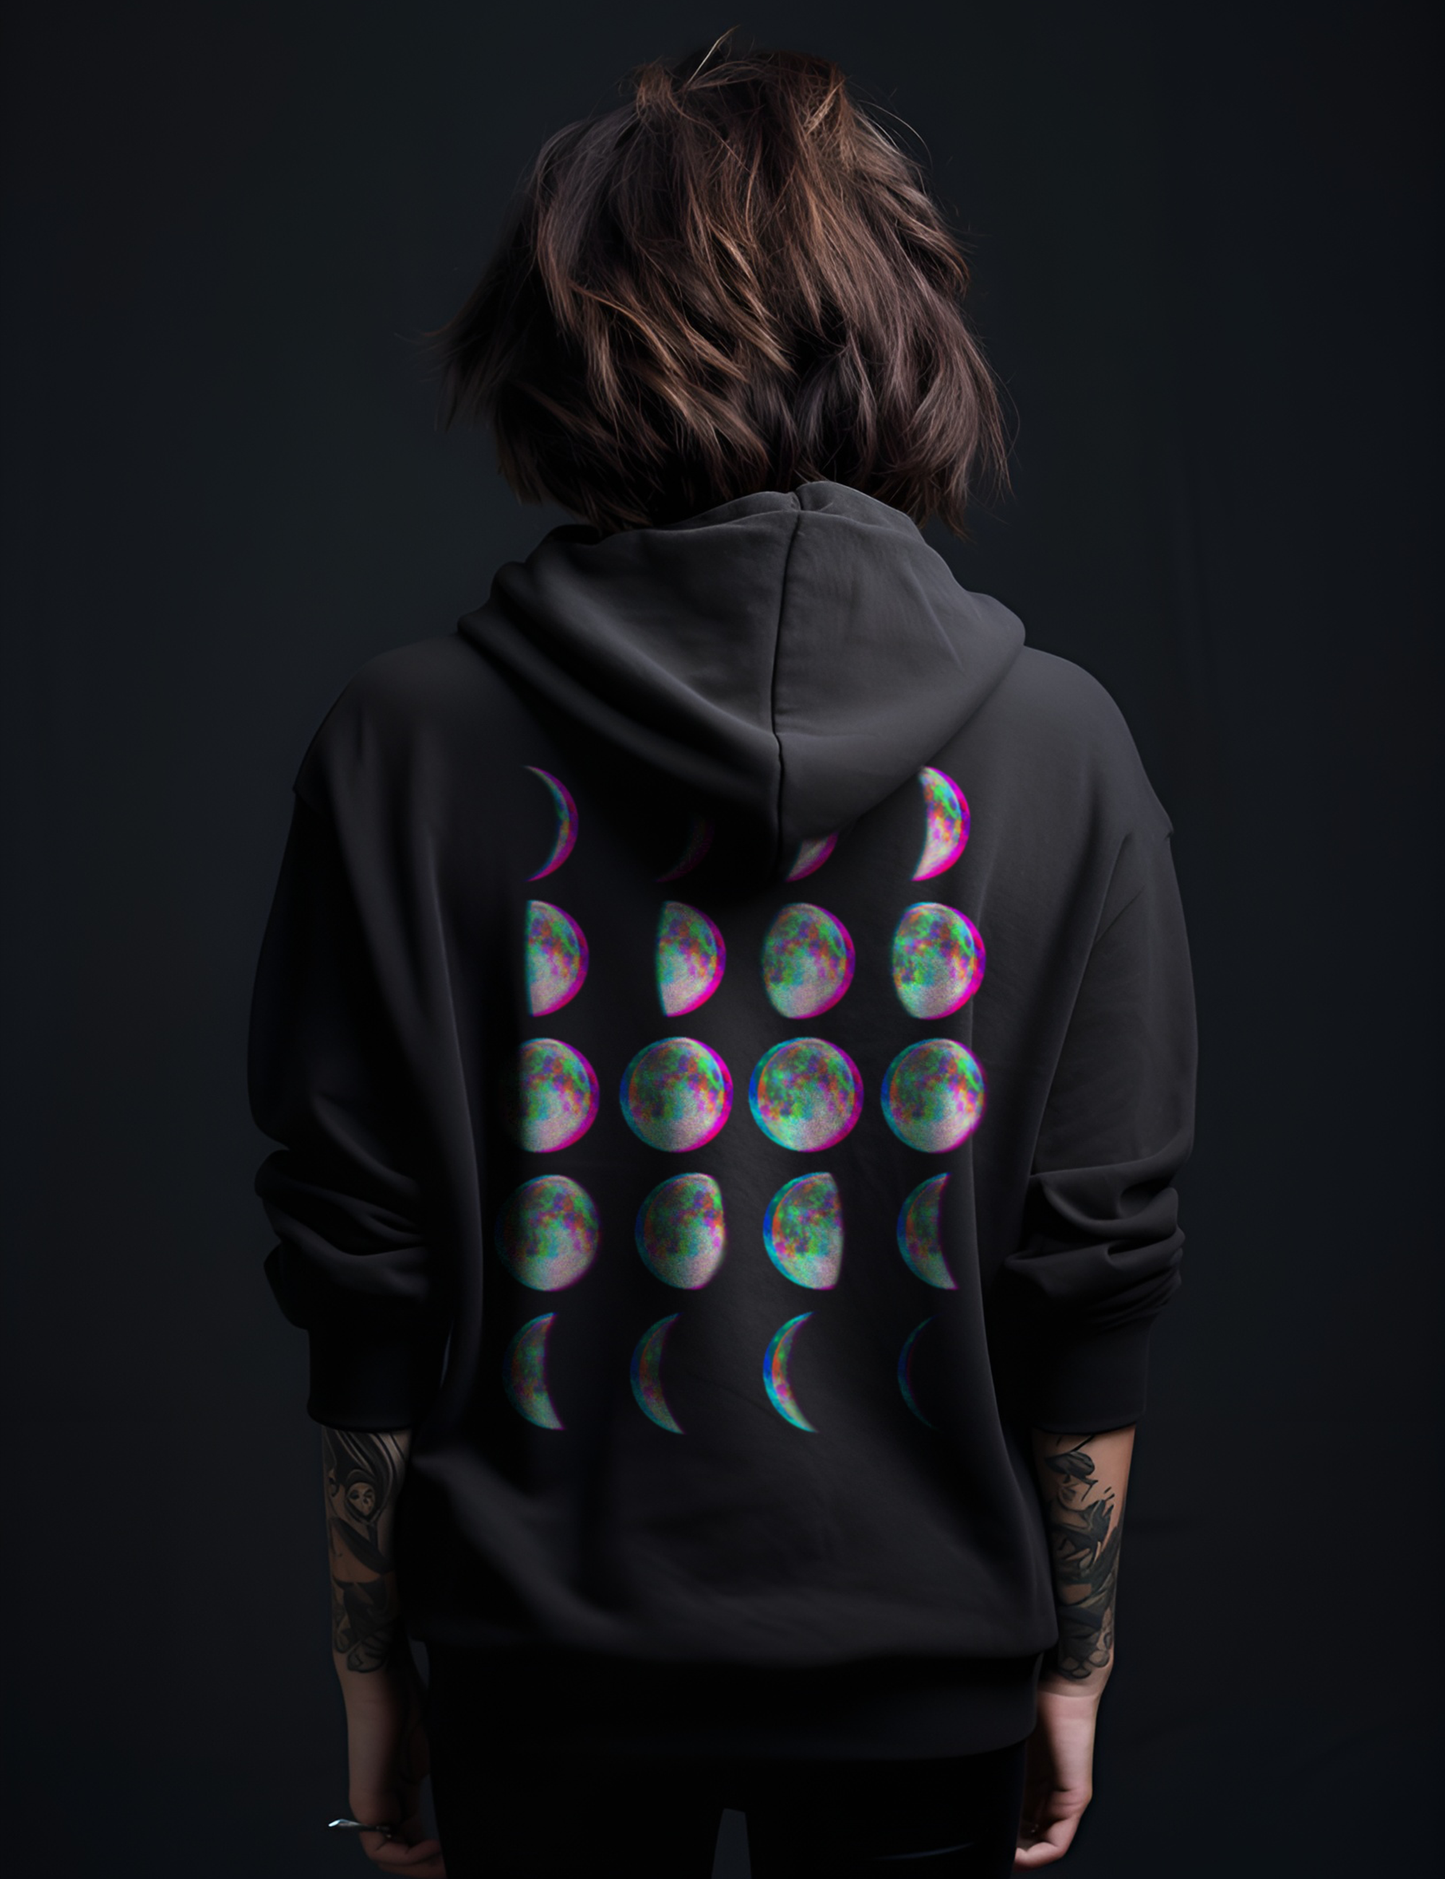 Edgy Goth Witchy Glitch Moon Phase Plus Size Zip Up Hoodie